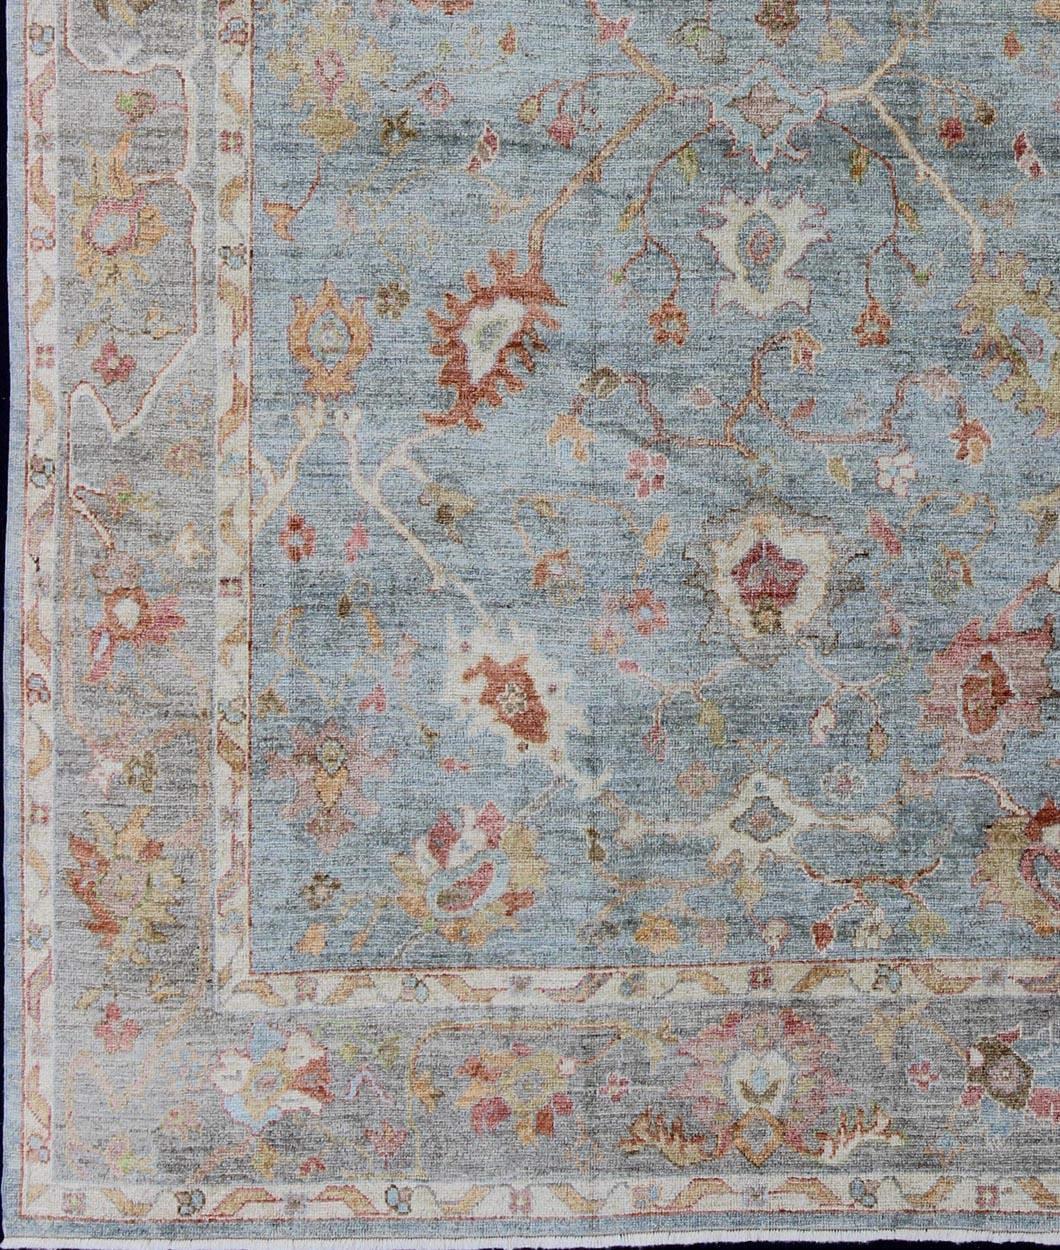 Silver, red, light blue and silver Angora Oushak rug from Turkey, rug an-134592, country of origin / type: Turkey / Angora Oushak

From our Angora collection, this piece is made with a combination of angora and old wool. Featuring all organic